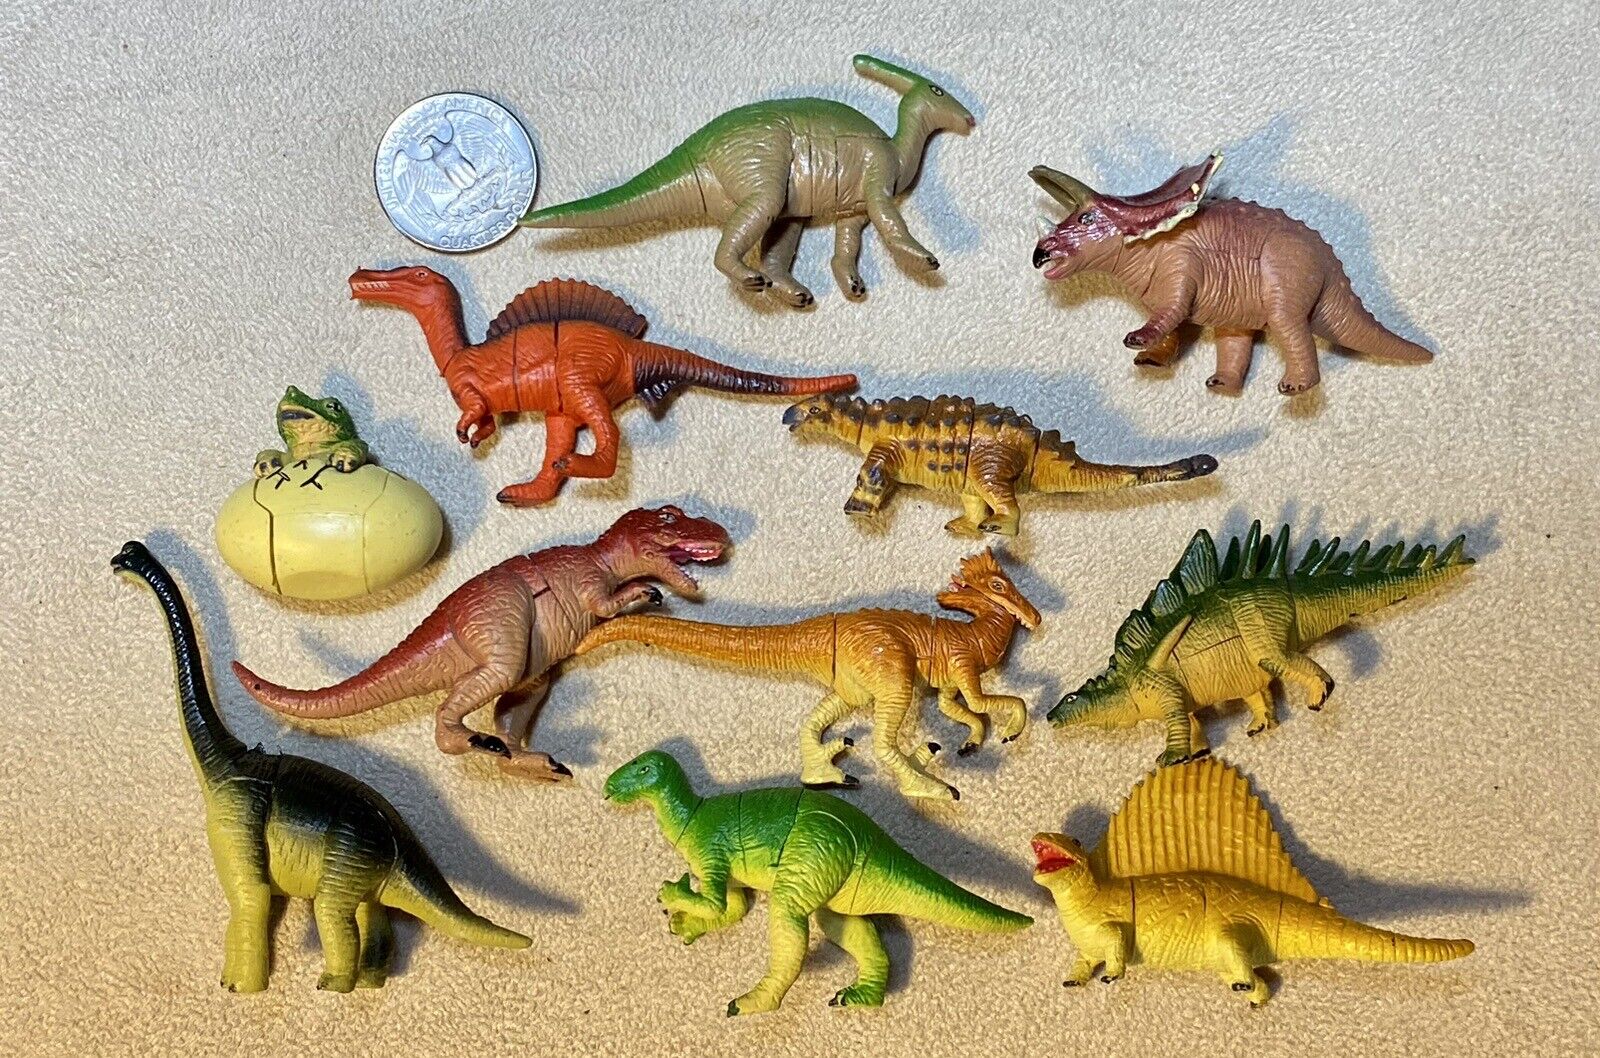 Small Plastic Dinosaur 3D Puzzle Toy Lot of 11